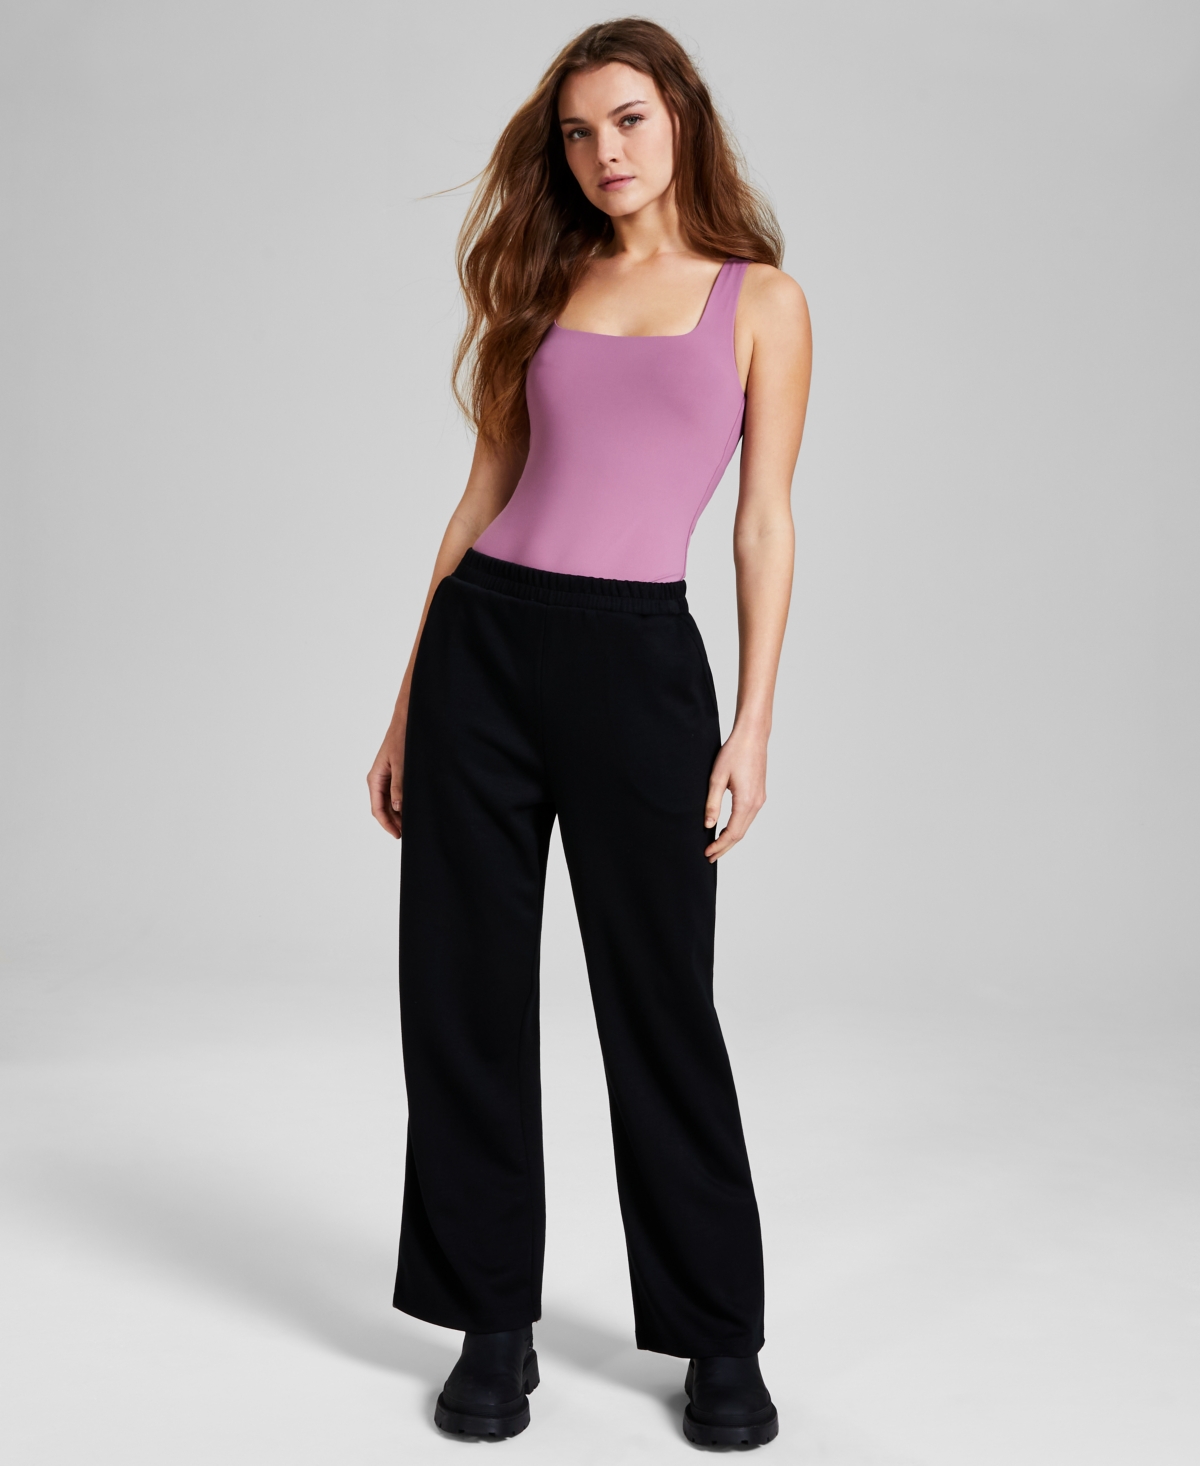 Women's Wide-Leg Pull-On Pant Created for Macy's - Hammock